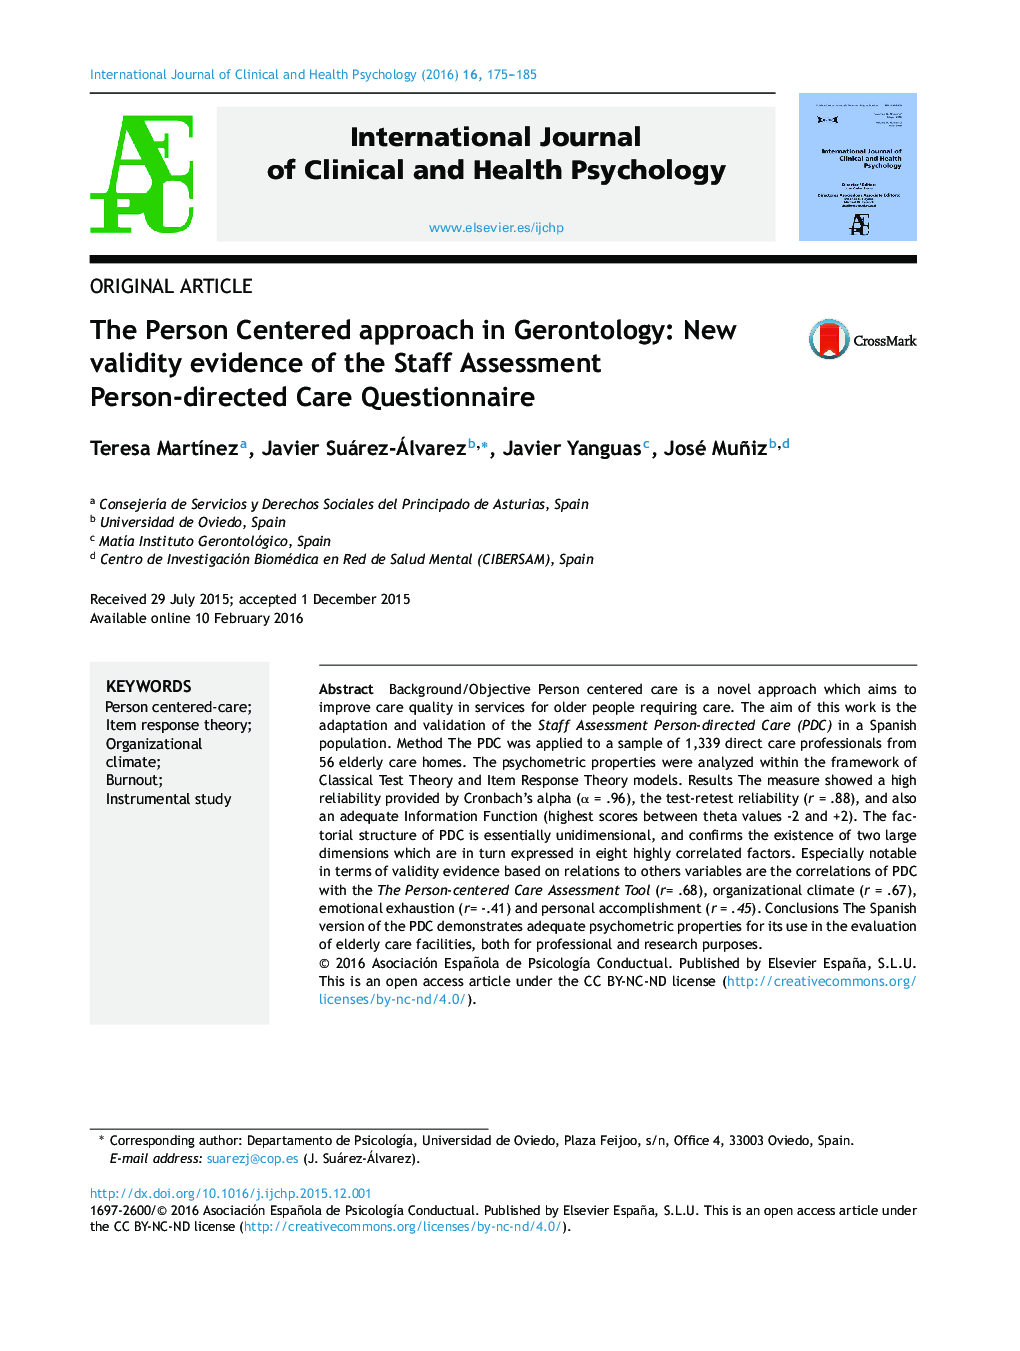 The Person Centered approach in Gerontology: New validity evidence of the Staff Assessment Person-directed Care Questionnaire